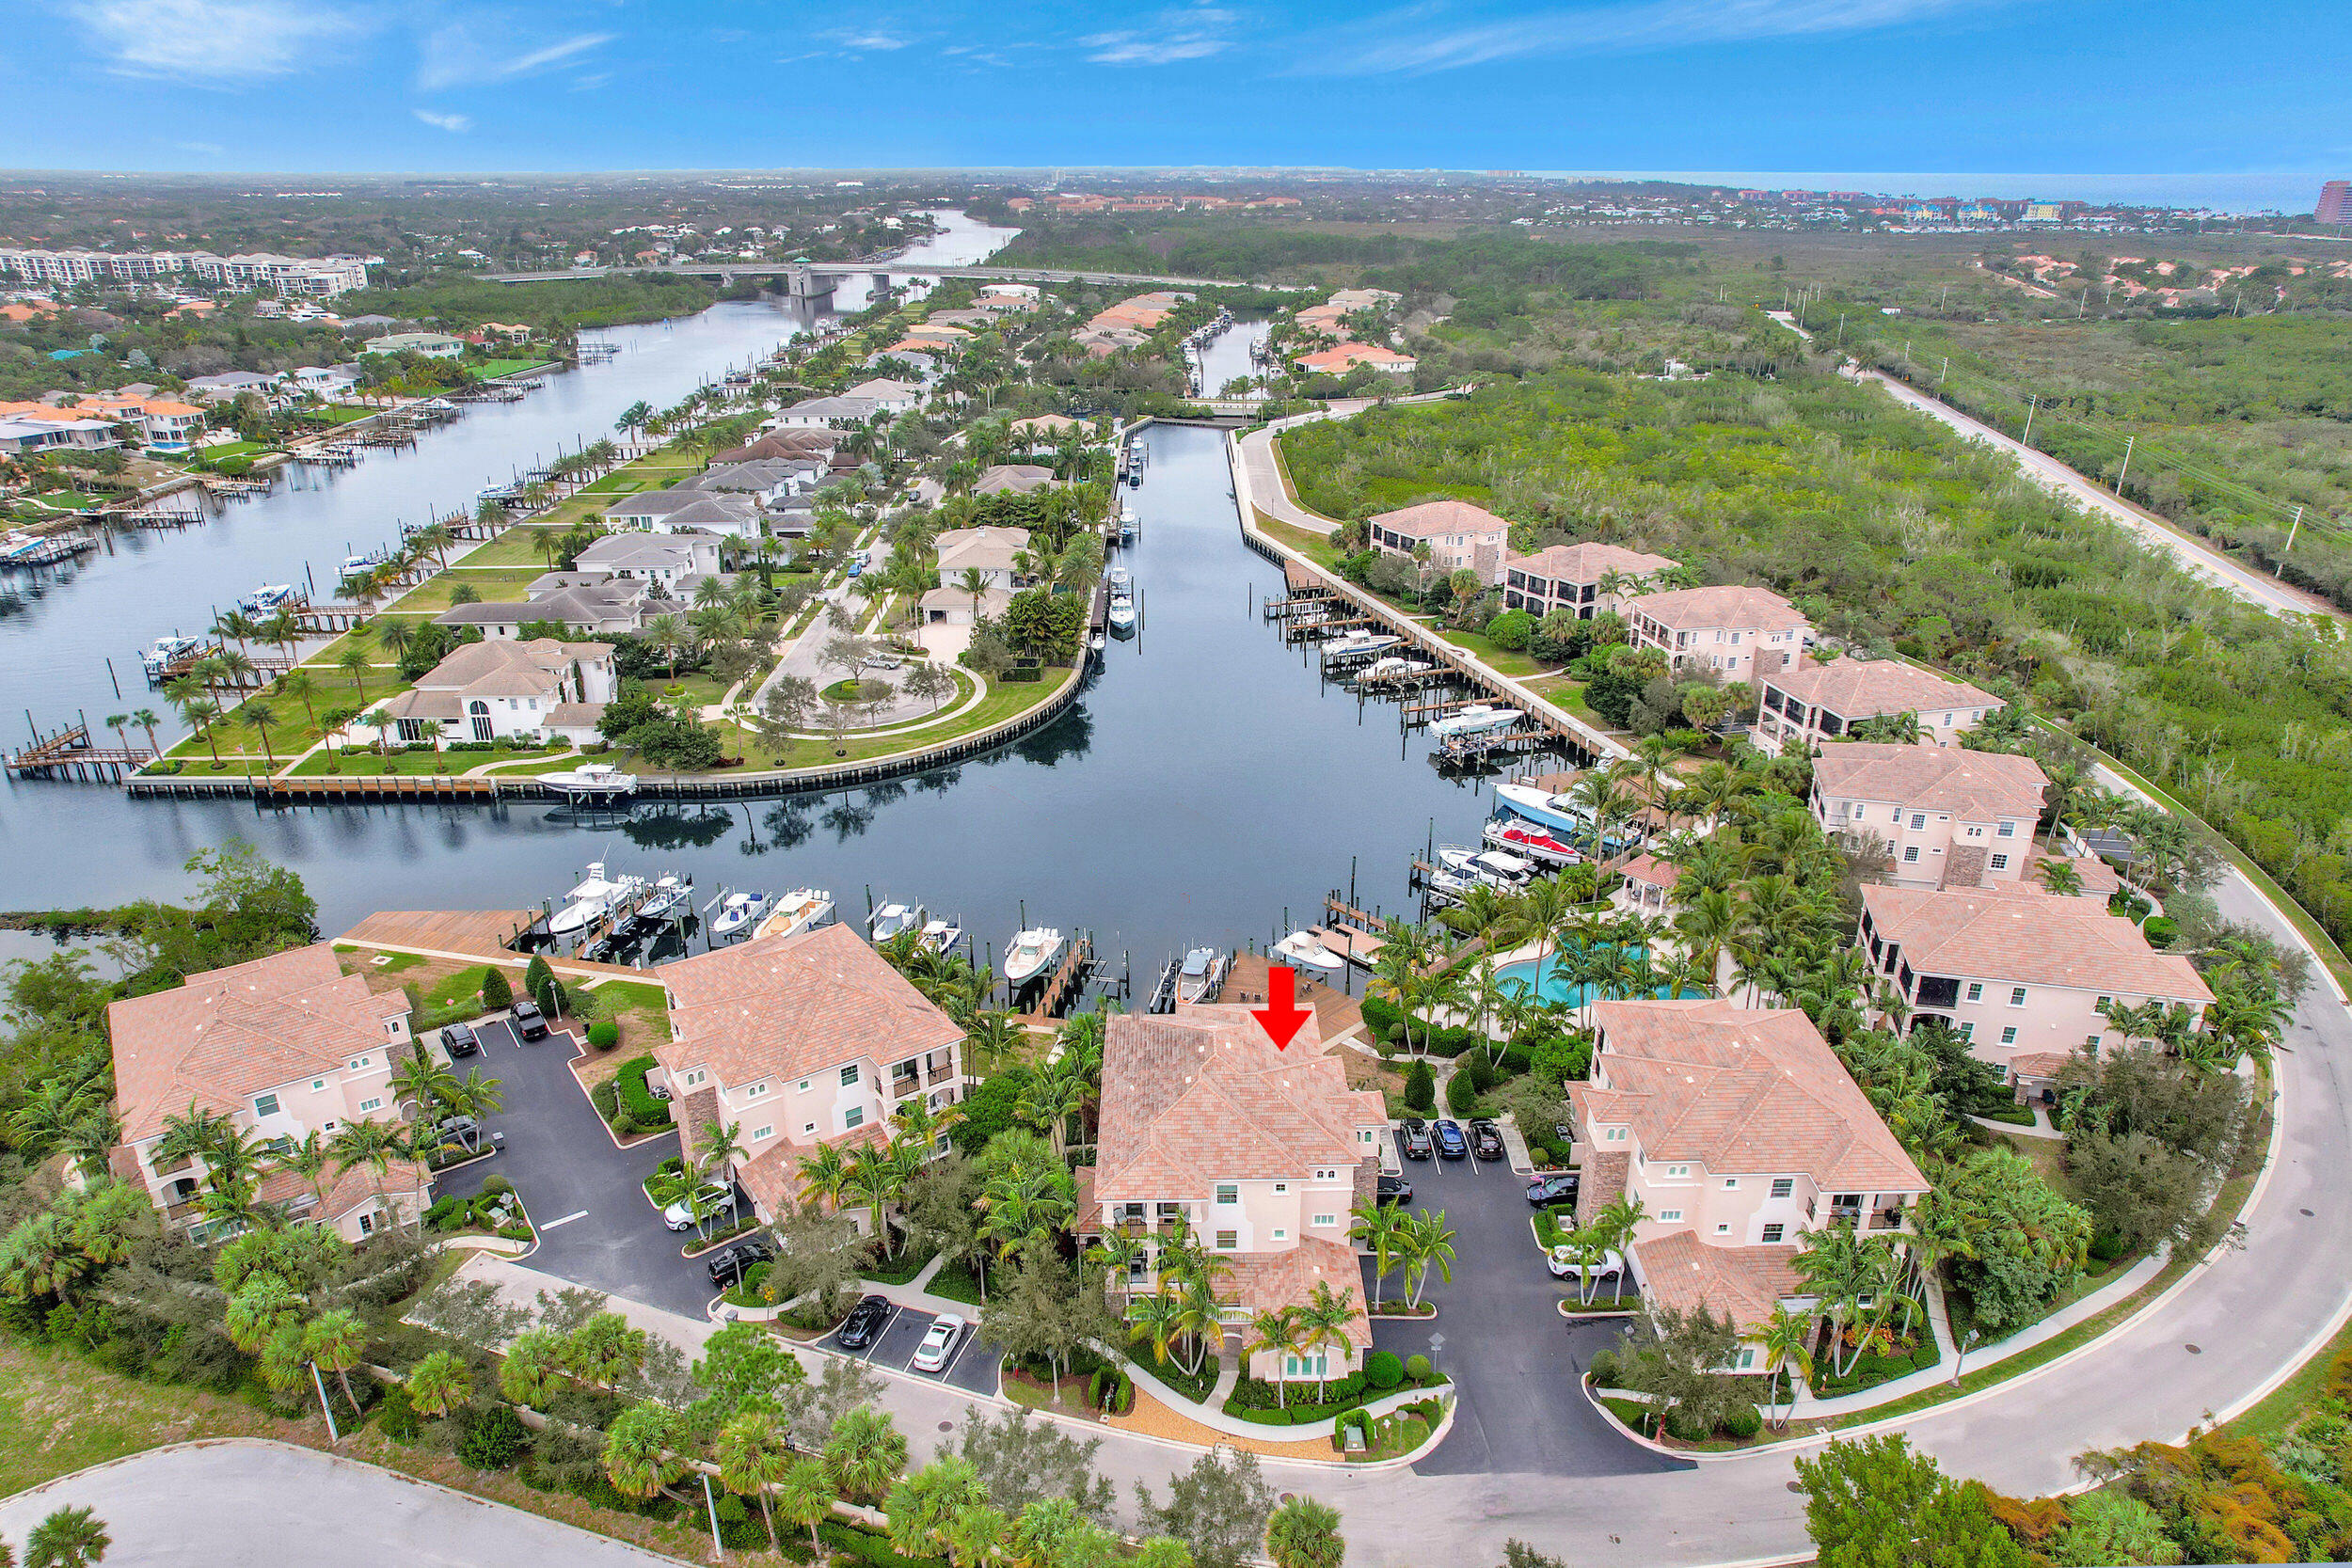 Rarely available! Luxury 3rd floor Penthouse in the sought after Waterfront gated community of Frenchman's Harbor with amazing Intracoastal & Sunset views! A boater's dream...45' deeded dock with a 20k lift in a deep-water safe harbor! (can accommodate up to a 65' vessel, slip is 22' wide) Ocean access, no fixed bridges, minutes to the Palm Bch Inlet & Jupiter Inlet & the turquoise waters of the Atlantic! Beautifully appointed & immaculately kept, this 3bd/ 2ba home is truly move in ready! An open floor plan makes it perfect for entertaining, boasting almost 2600 sqft living space & over 1,000 sqft covered balconies to enjoy the views! This home features polished marble flooring throughout, crown molding, volume ceilings, impact windows and doors, gourmet kitchen with an oversized island COUNTERTOPS, CUSTOM WOOD CABINETRY WITH UNDERMOUNT LIGHTING. AN EXPANSIVE MASTER SUITE WITH WALK-IN CLOSET, SOAKING TUB, FRAMELESS GLASS SHOWER, DOUBLE VANITES, WATER CLOSET WITH BIDET, PRIVATE ELEVATOR, INTERIOR ELETRIC BLINDS AND PHANTOM SCREENS ON THE MAIN BALCONY AND AN OVERSIZED 2 CAR GARAGE WITH EXPOXY FLOORS &amp; TONS OF STORAGE! FRENCHMANS HARBOR IS CONVENIETLY LOCATED CLOSE TO FABULOUS SHOPPING AND RESTAURANTS, GOLF AND PRISTINE BEACHES. CLOSE TO I-95, TURNPIKE AND PBIA.